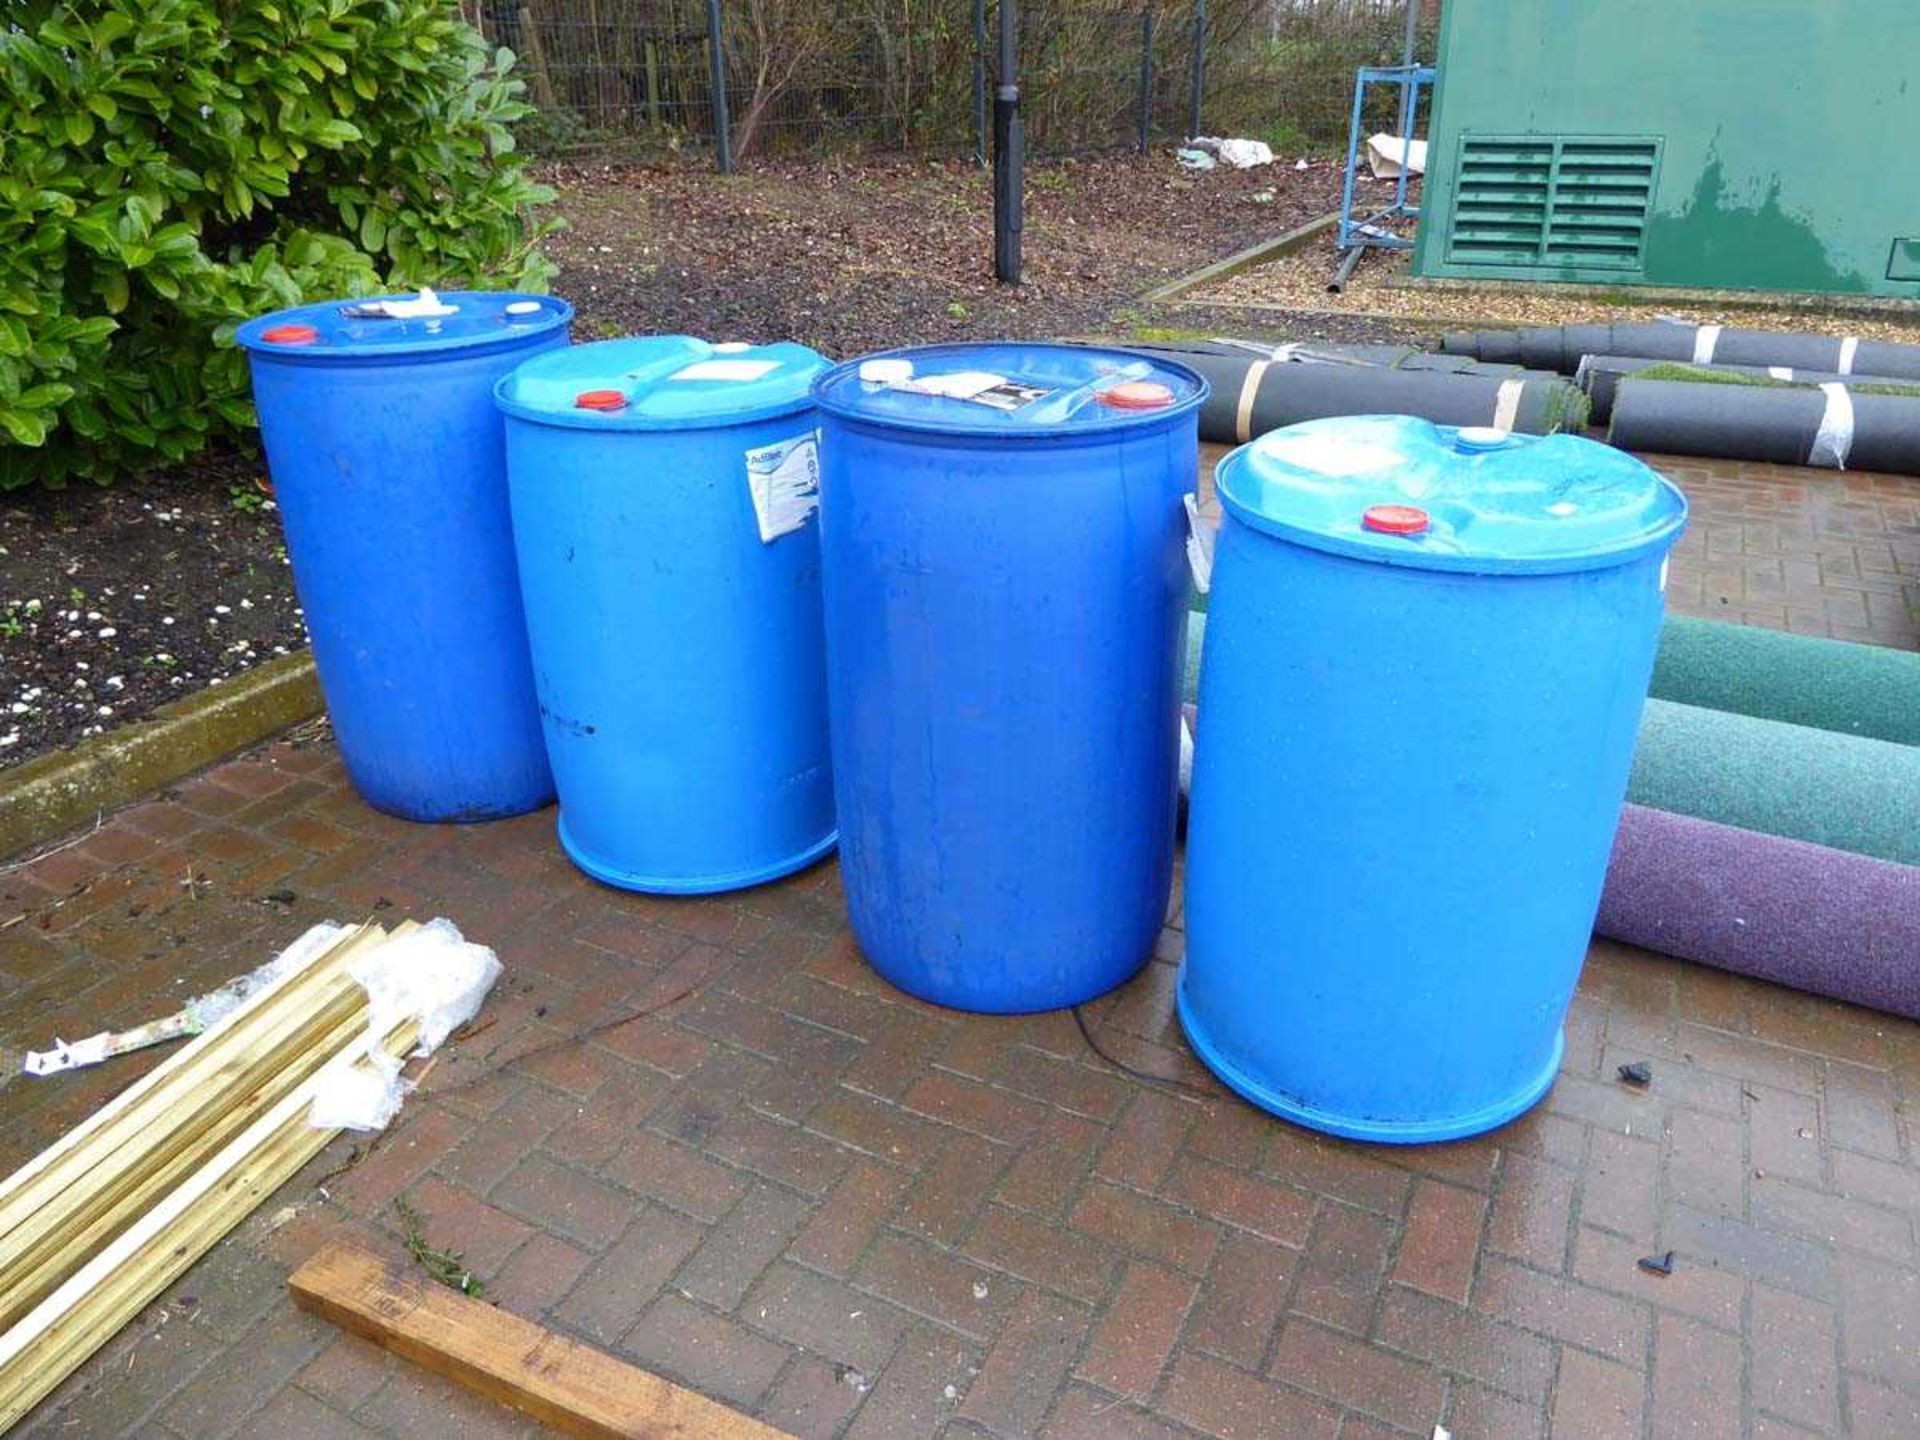 4 large Ad Blue containers